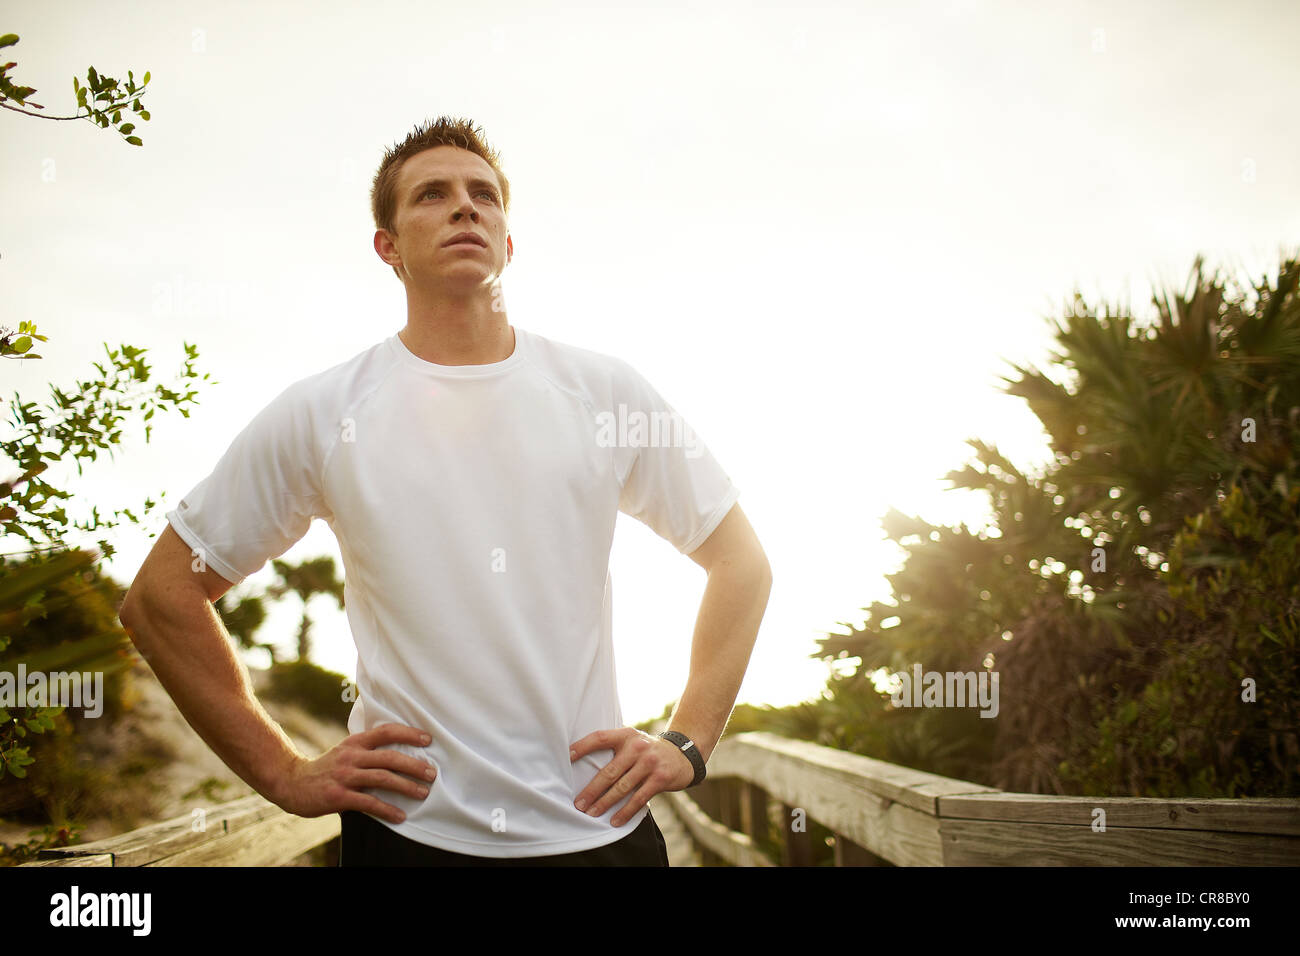 Runner stopping to catch breath and reflect Stock Photo